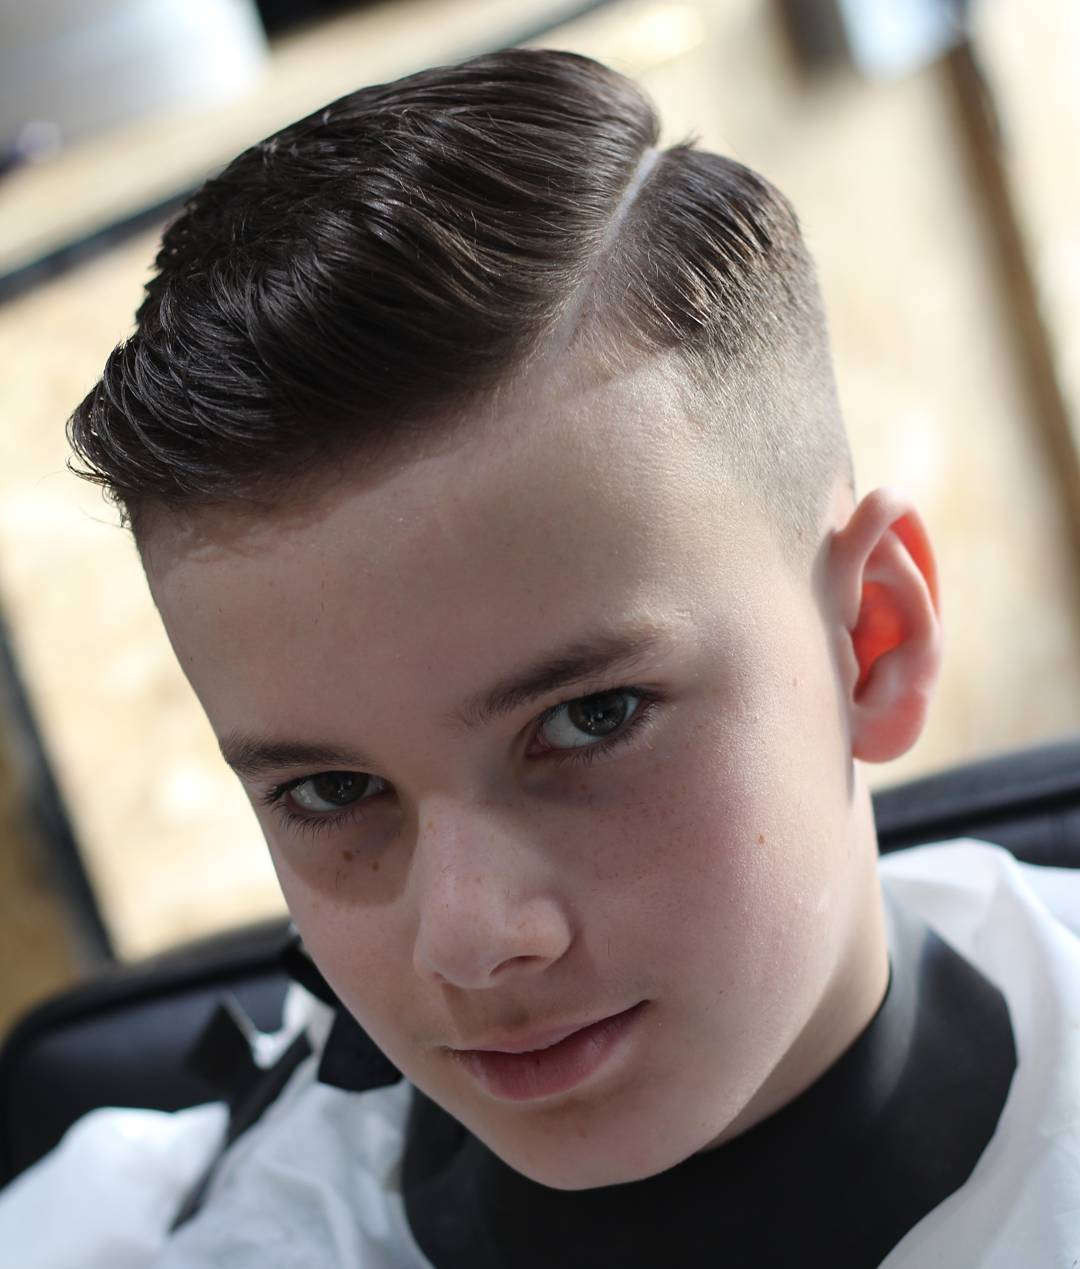 Stylish Boy Haircuts
 50 Best Hairstyles for Teenage Boys The Ultimate Guide 2019